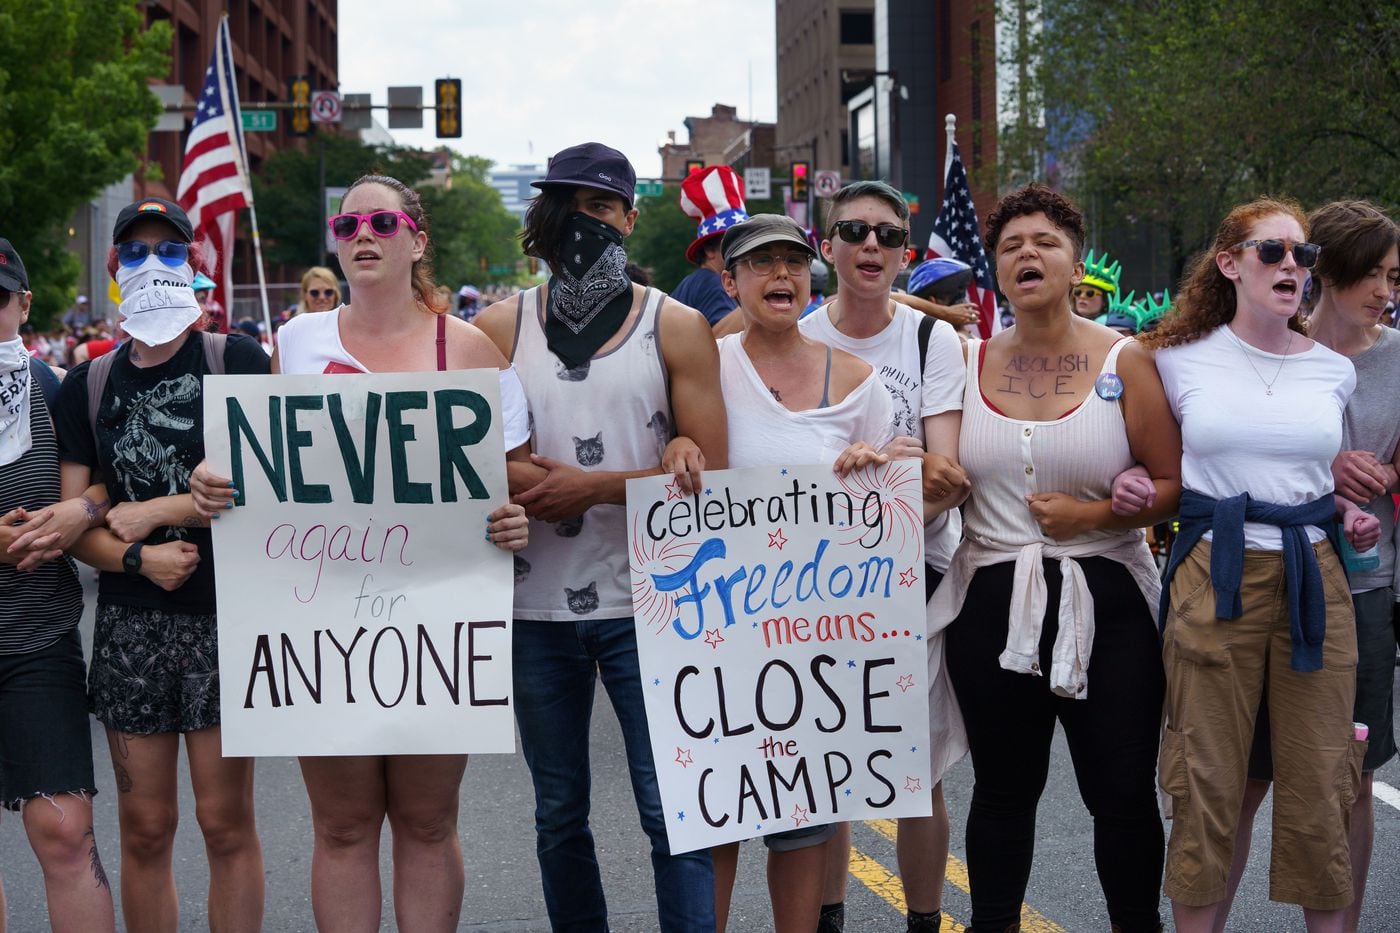 Protesters interrupt the Salute to America parade with a message demanding the closure of detention camps at the United States-Mexico border.